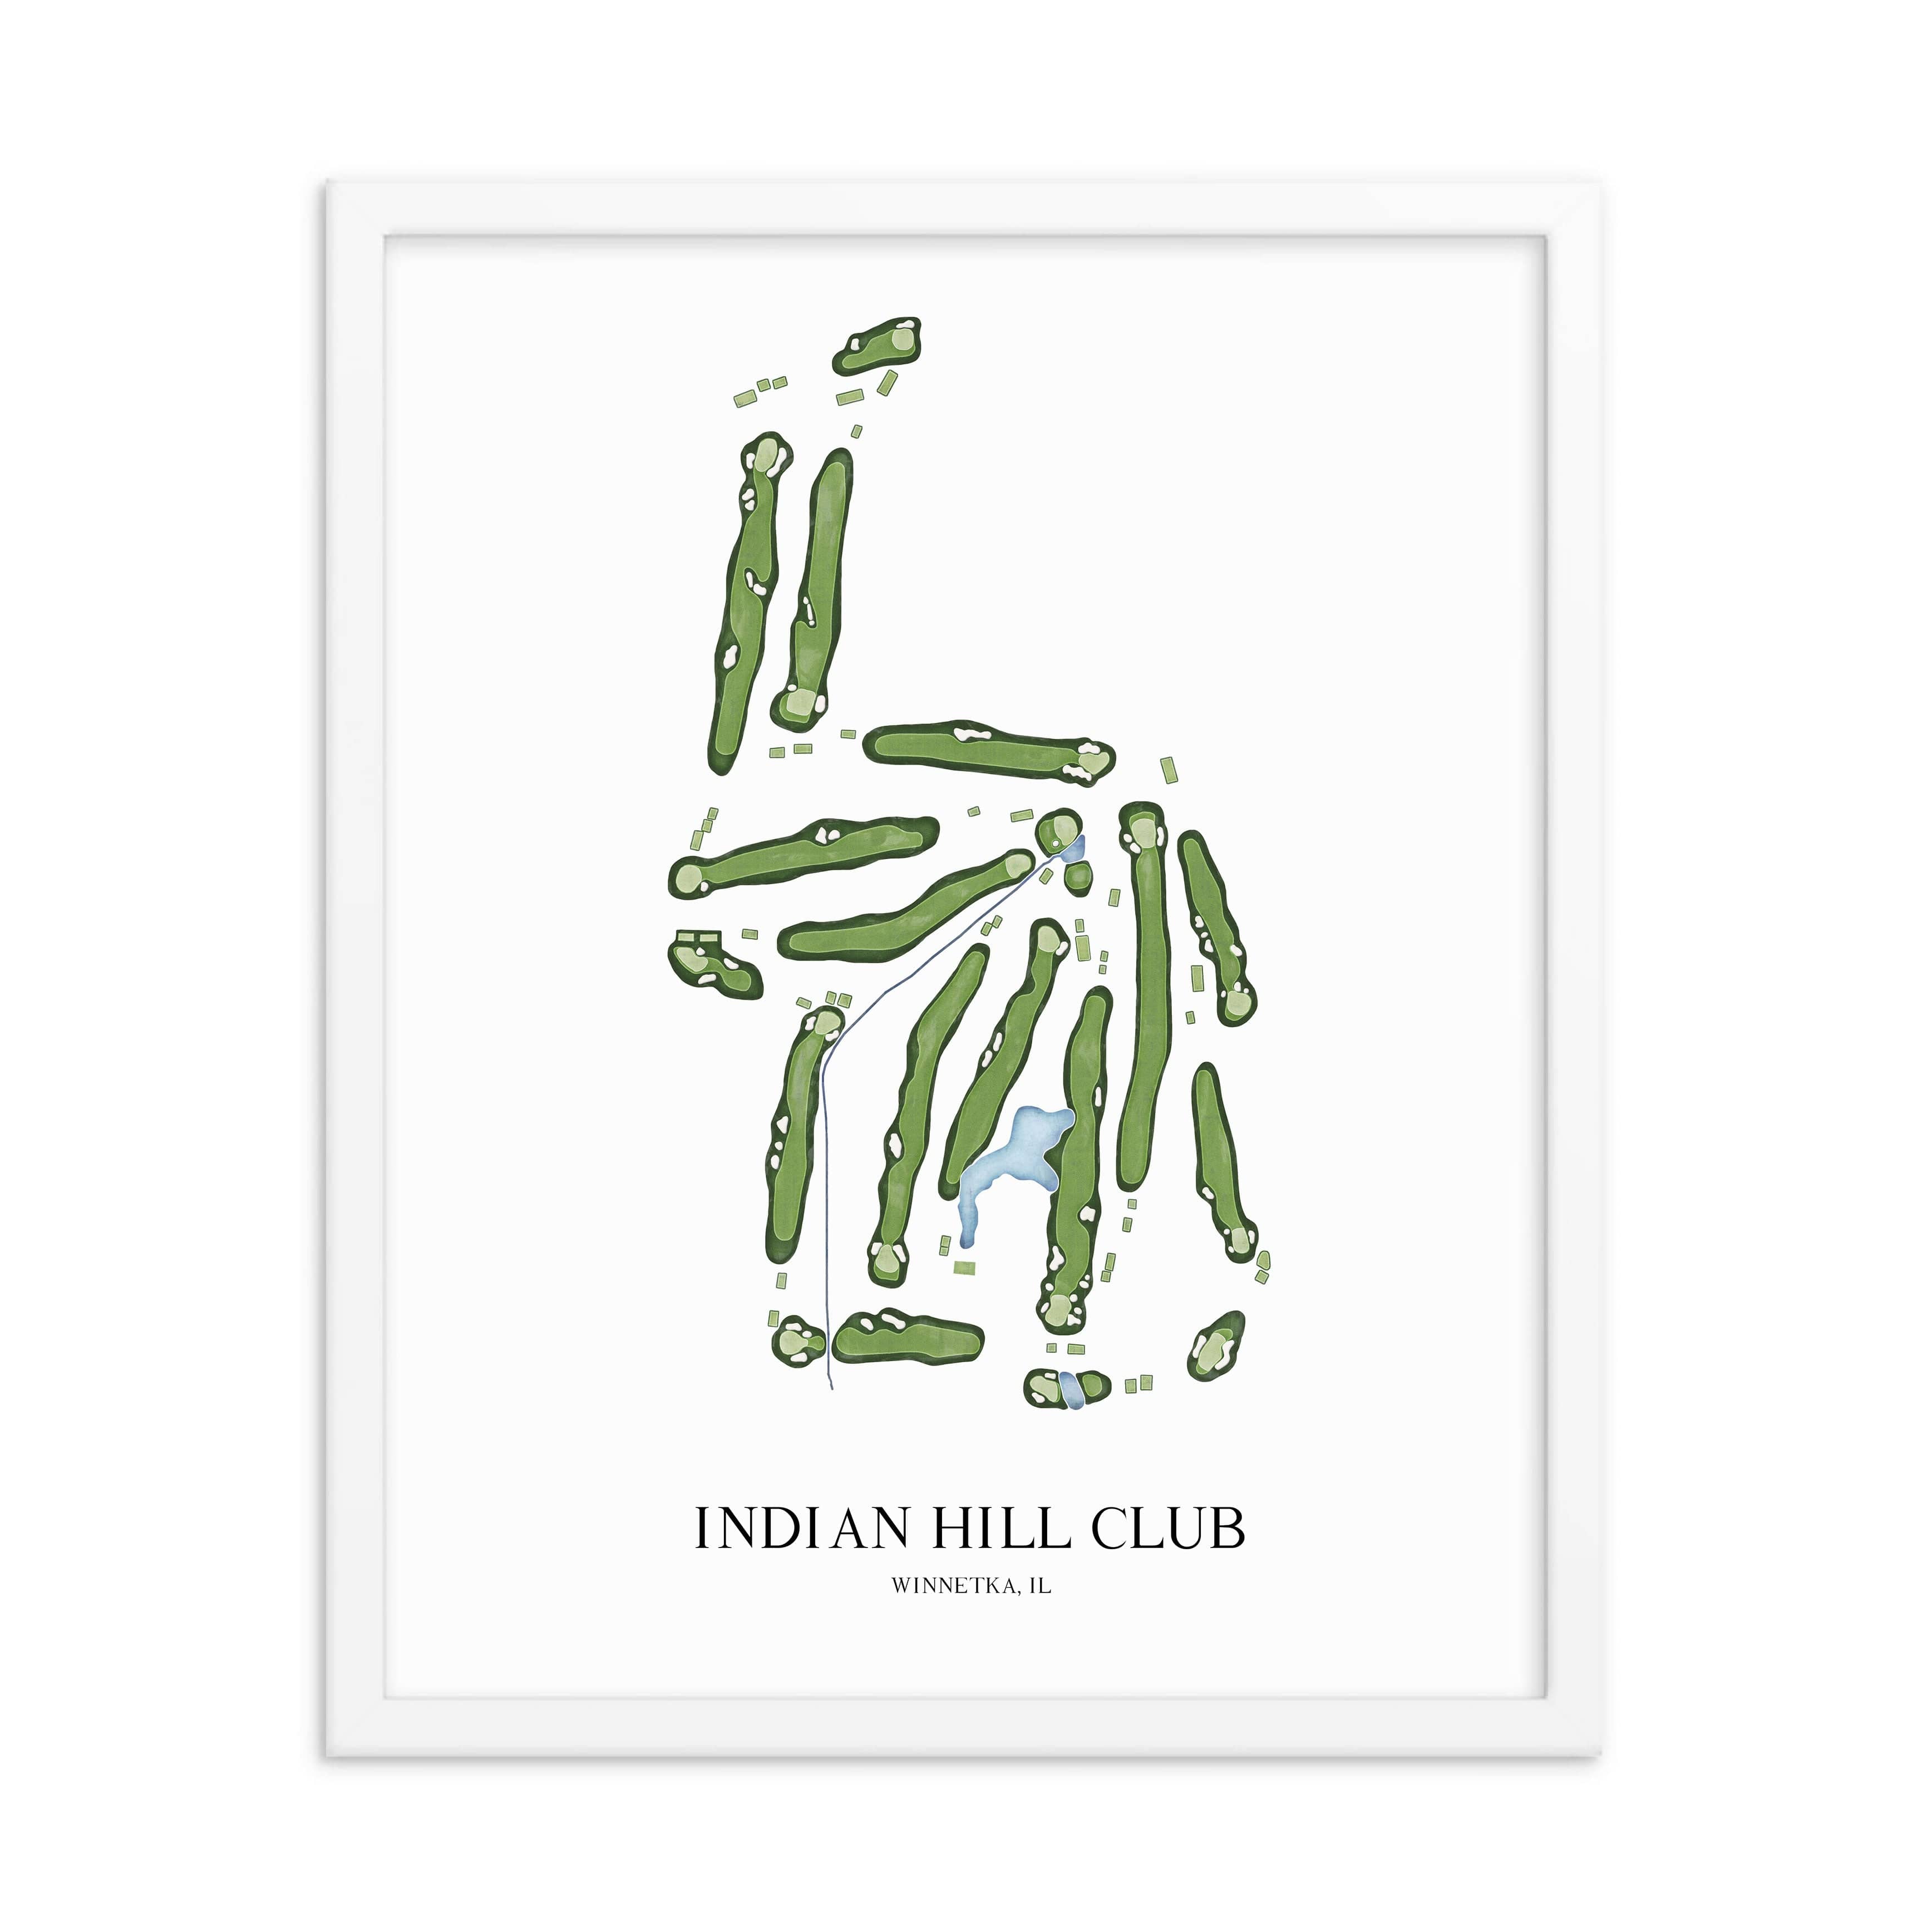 The 19th Hole Golf Shop - Golf Course Prints -  Indian Hill Club Golf Course Map